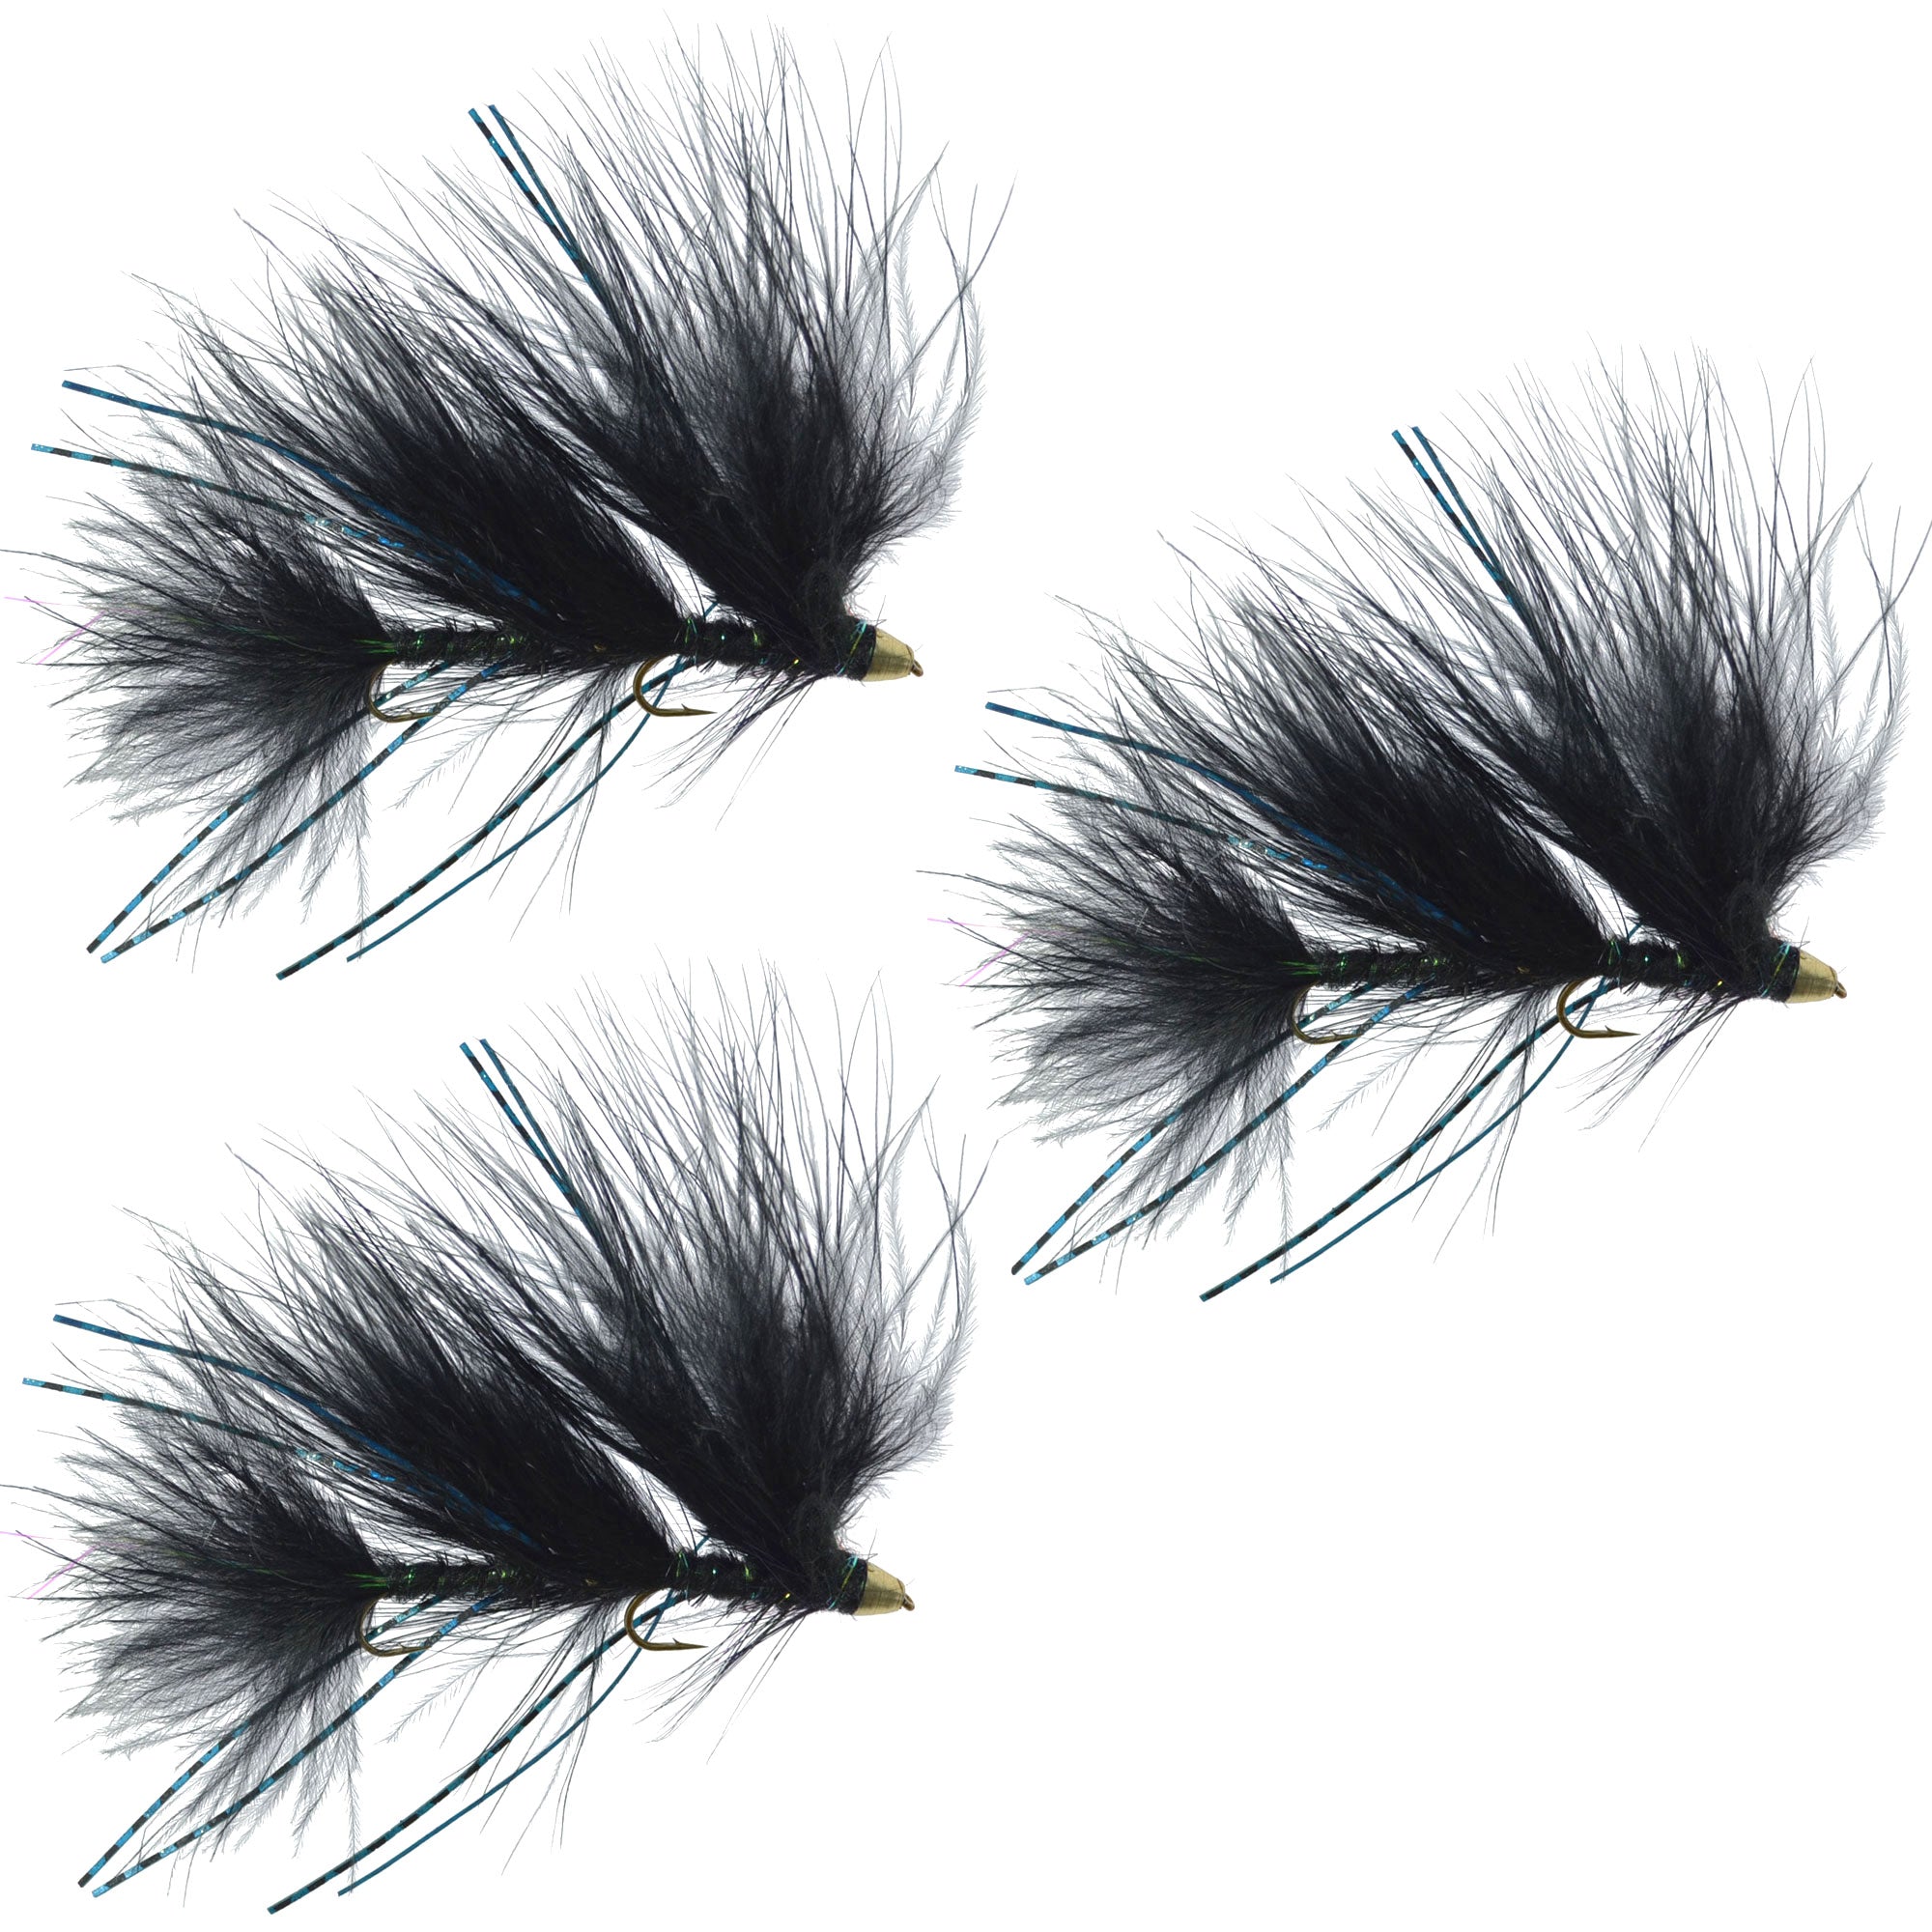 Circus Peanut Envy Streamer Black - Size 6 - Articulated Trout Bass Steelhead Salmon and Bass Fly Fishing Flies